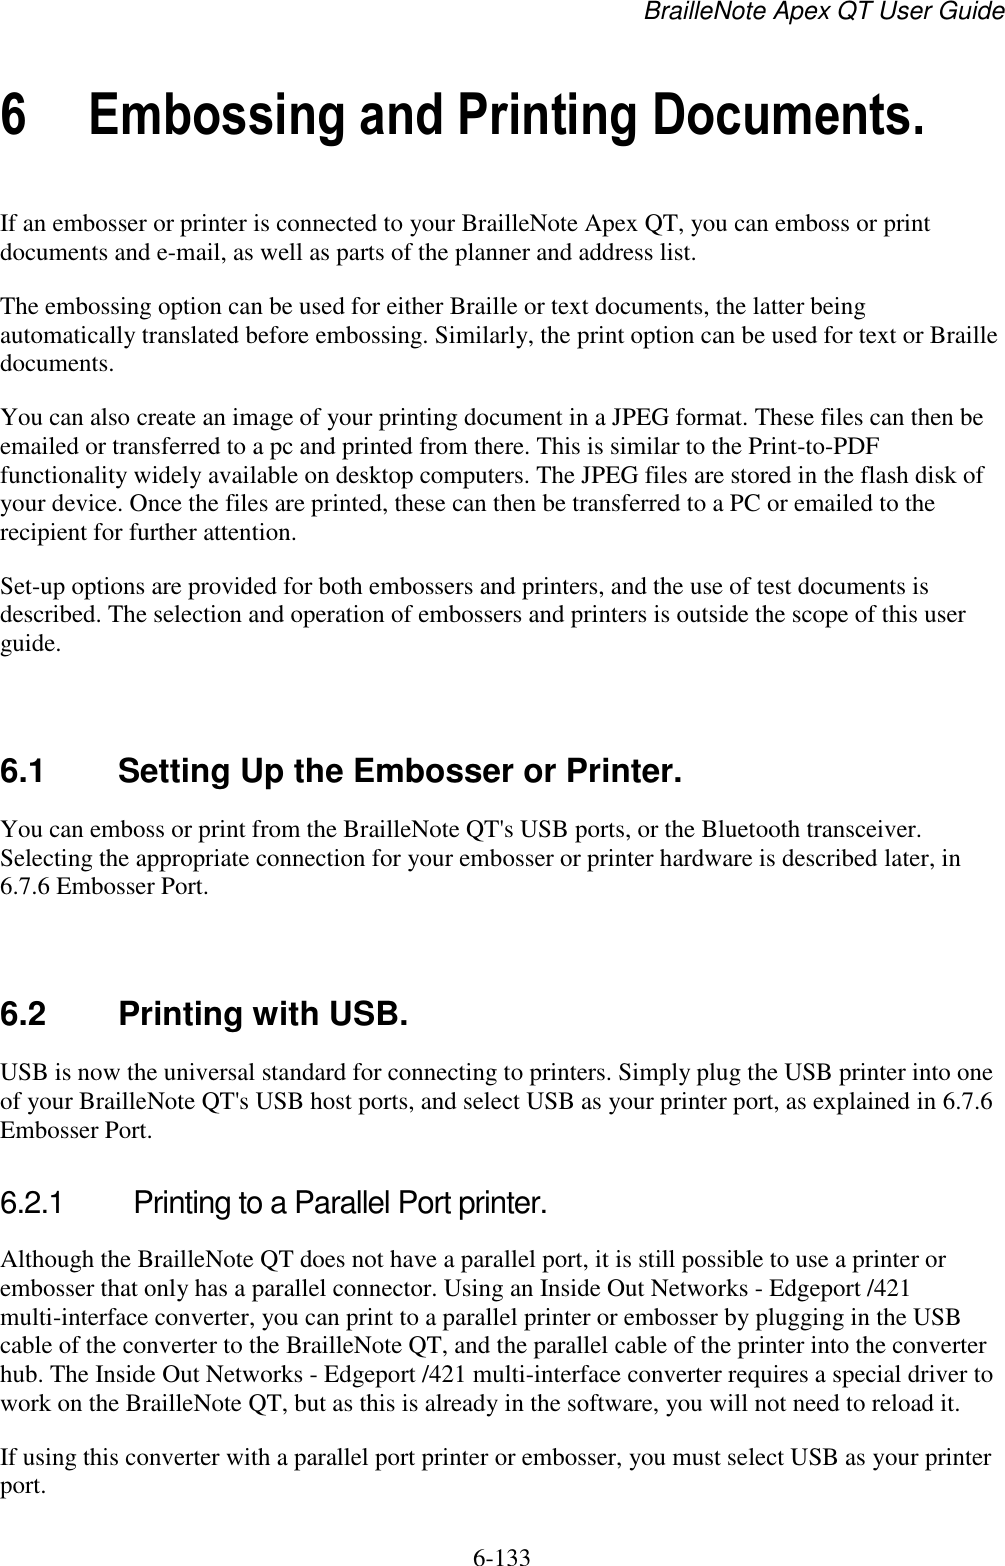 BrailleNote Apex QT User Guide  6-133   6 Embossing and Printing Documents. If an embosser or printer is connected to your BrailleNote Apex QT, you can emboss or print documents and e-mail, as well as parts of the planner and address list. The embossing option can be used for either Braille or text documents, the latter being automatically translated before embossing. Similarly, the print option can be used for text or Braille documents. You can also create an image of your printing document in a JPEG format. These files can then be emailed or transferred to a pc and printed from there. This is similar to the Print-to-PDF functionality widely available on desktop computers. The JPEG files are stored in the flash disk of your device. Once the files are printed, these can then be transferred to a PC or emailed to the recipient for further attention.  Set-up options are provided for both embossers and printers, and the use of test documents is described. The selection and operation of embossers and printers is outside the scope of this user guide.   6.1  Setting Up the Embosser or Printer. You can emboss or print from the BrailleNote QT&apos;s USB ports, or the Bluetooth transceiver. Selecting the appropriate connection for your embosser or printer hardware is described later, in 6.7.6 Embosser Port.    6.2  Printing with USB. USB is now the universal standard for connecting to printers. Simply plug the USB printer into one of your BrailleNote QT&apos;s USB host ports, and select USB as your printer port, as explained in 6.7.6 Embosser Port.  6.2.1  Printing to a Parallel Port printer. Although the BrailleNote QT does not have a parallel port, it is still possible to use a printer or embosser that only has a parallel connector. Using an Inside Out Networks - Edgeport /421 multi-interface converter, you can print to a parallel printer or embosser by plugging in the USB cable of the converter to the BrailleNote QT, and the parallel cable of the printer into the converter hub. The Inside Out Networks - Edgeport /421 multi-interface converter requires a special driver to work on the BrailleNote QT, but as this is already in the software, you will not need to reload it.  If using this converter with a parallel port printer or embosser, you must select USB as your printer port.   